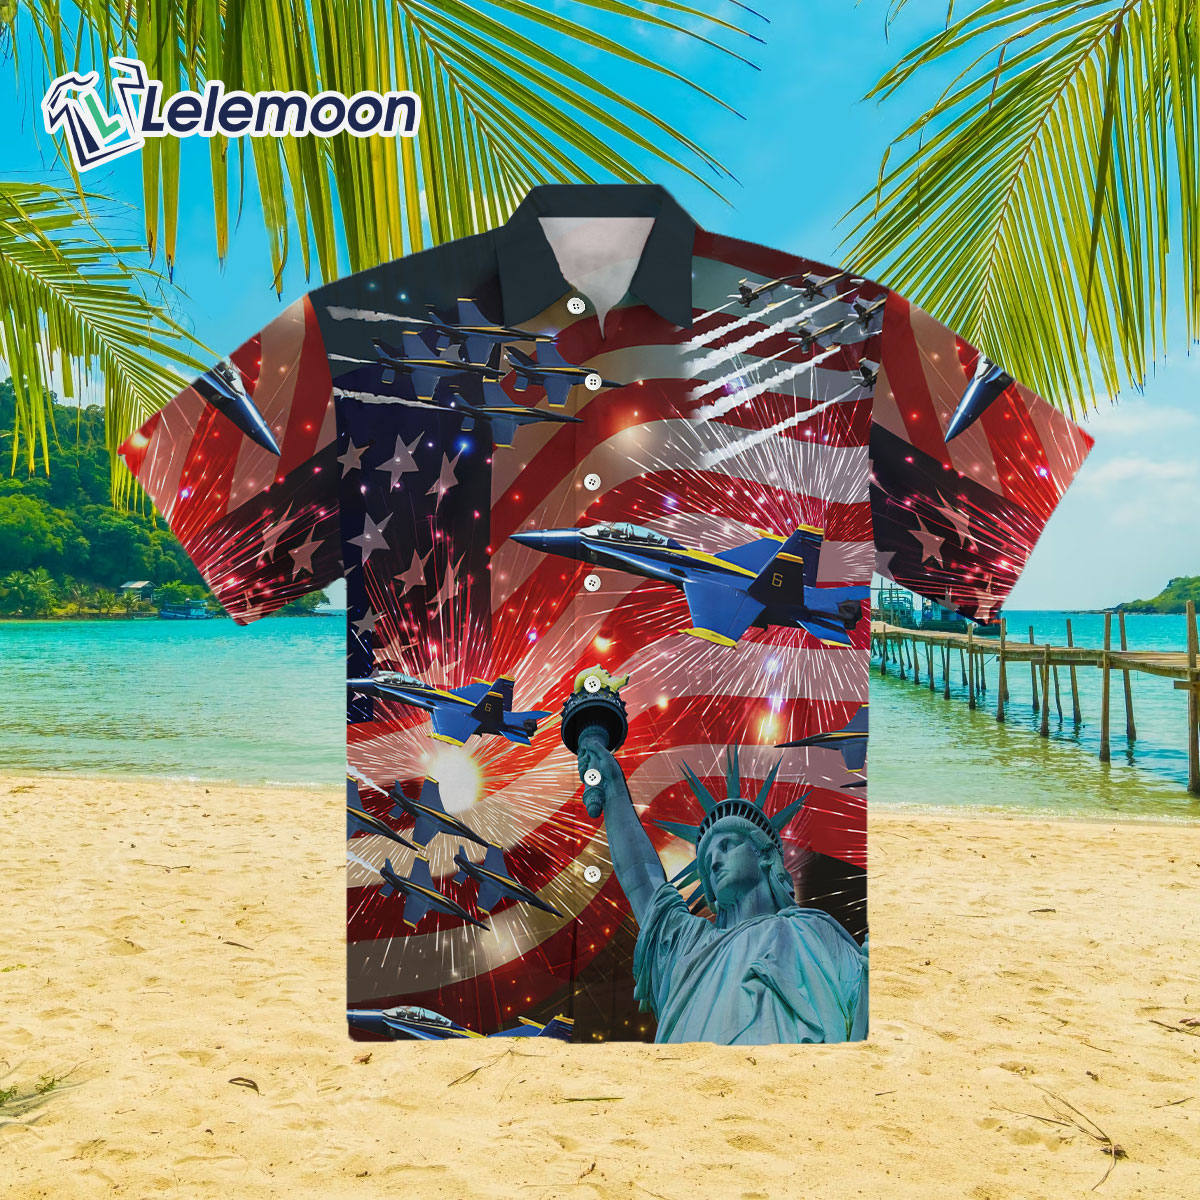 St. Louis Blues NHL Hawaiian Shirt 4th Of July Independence Day